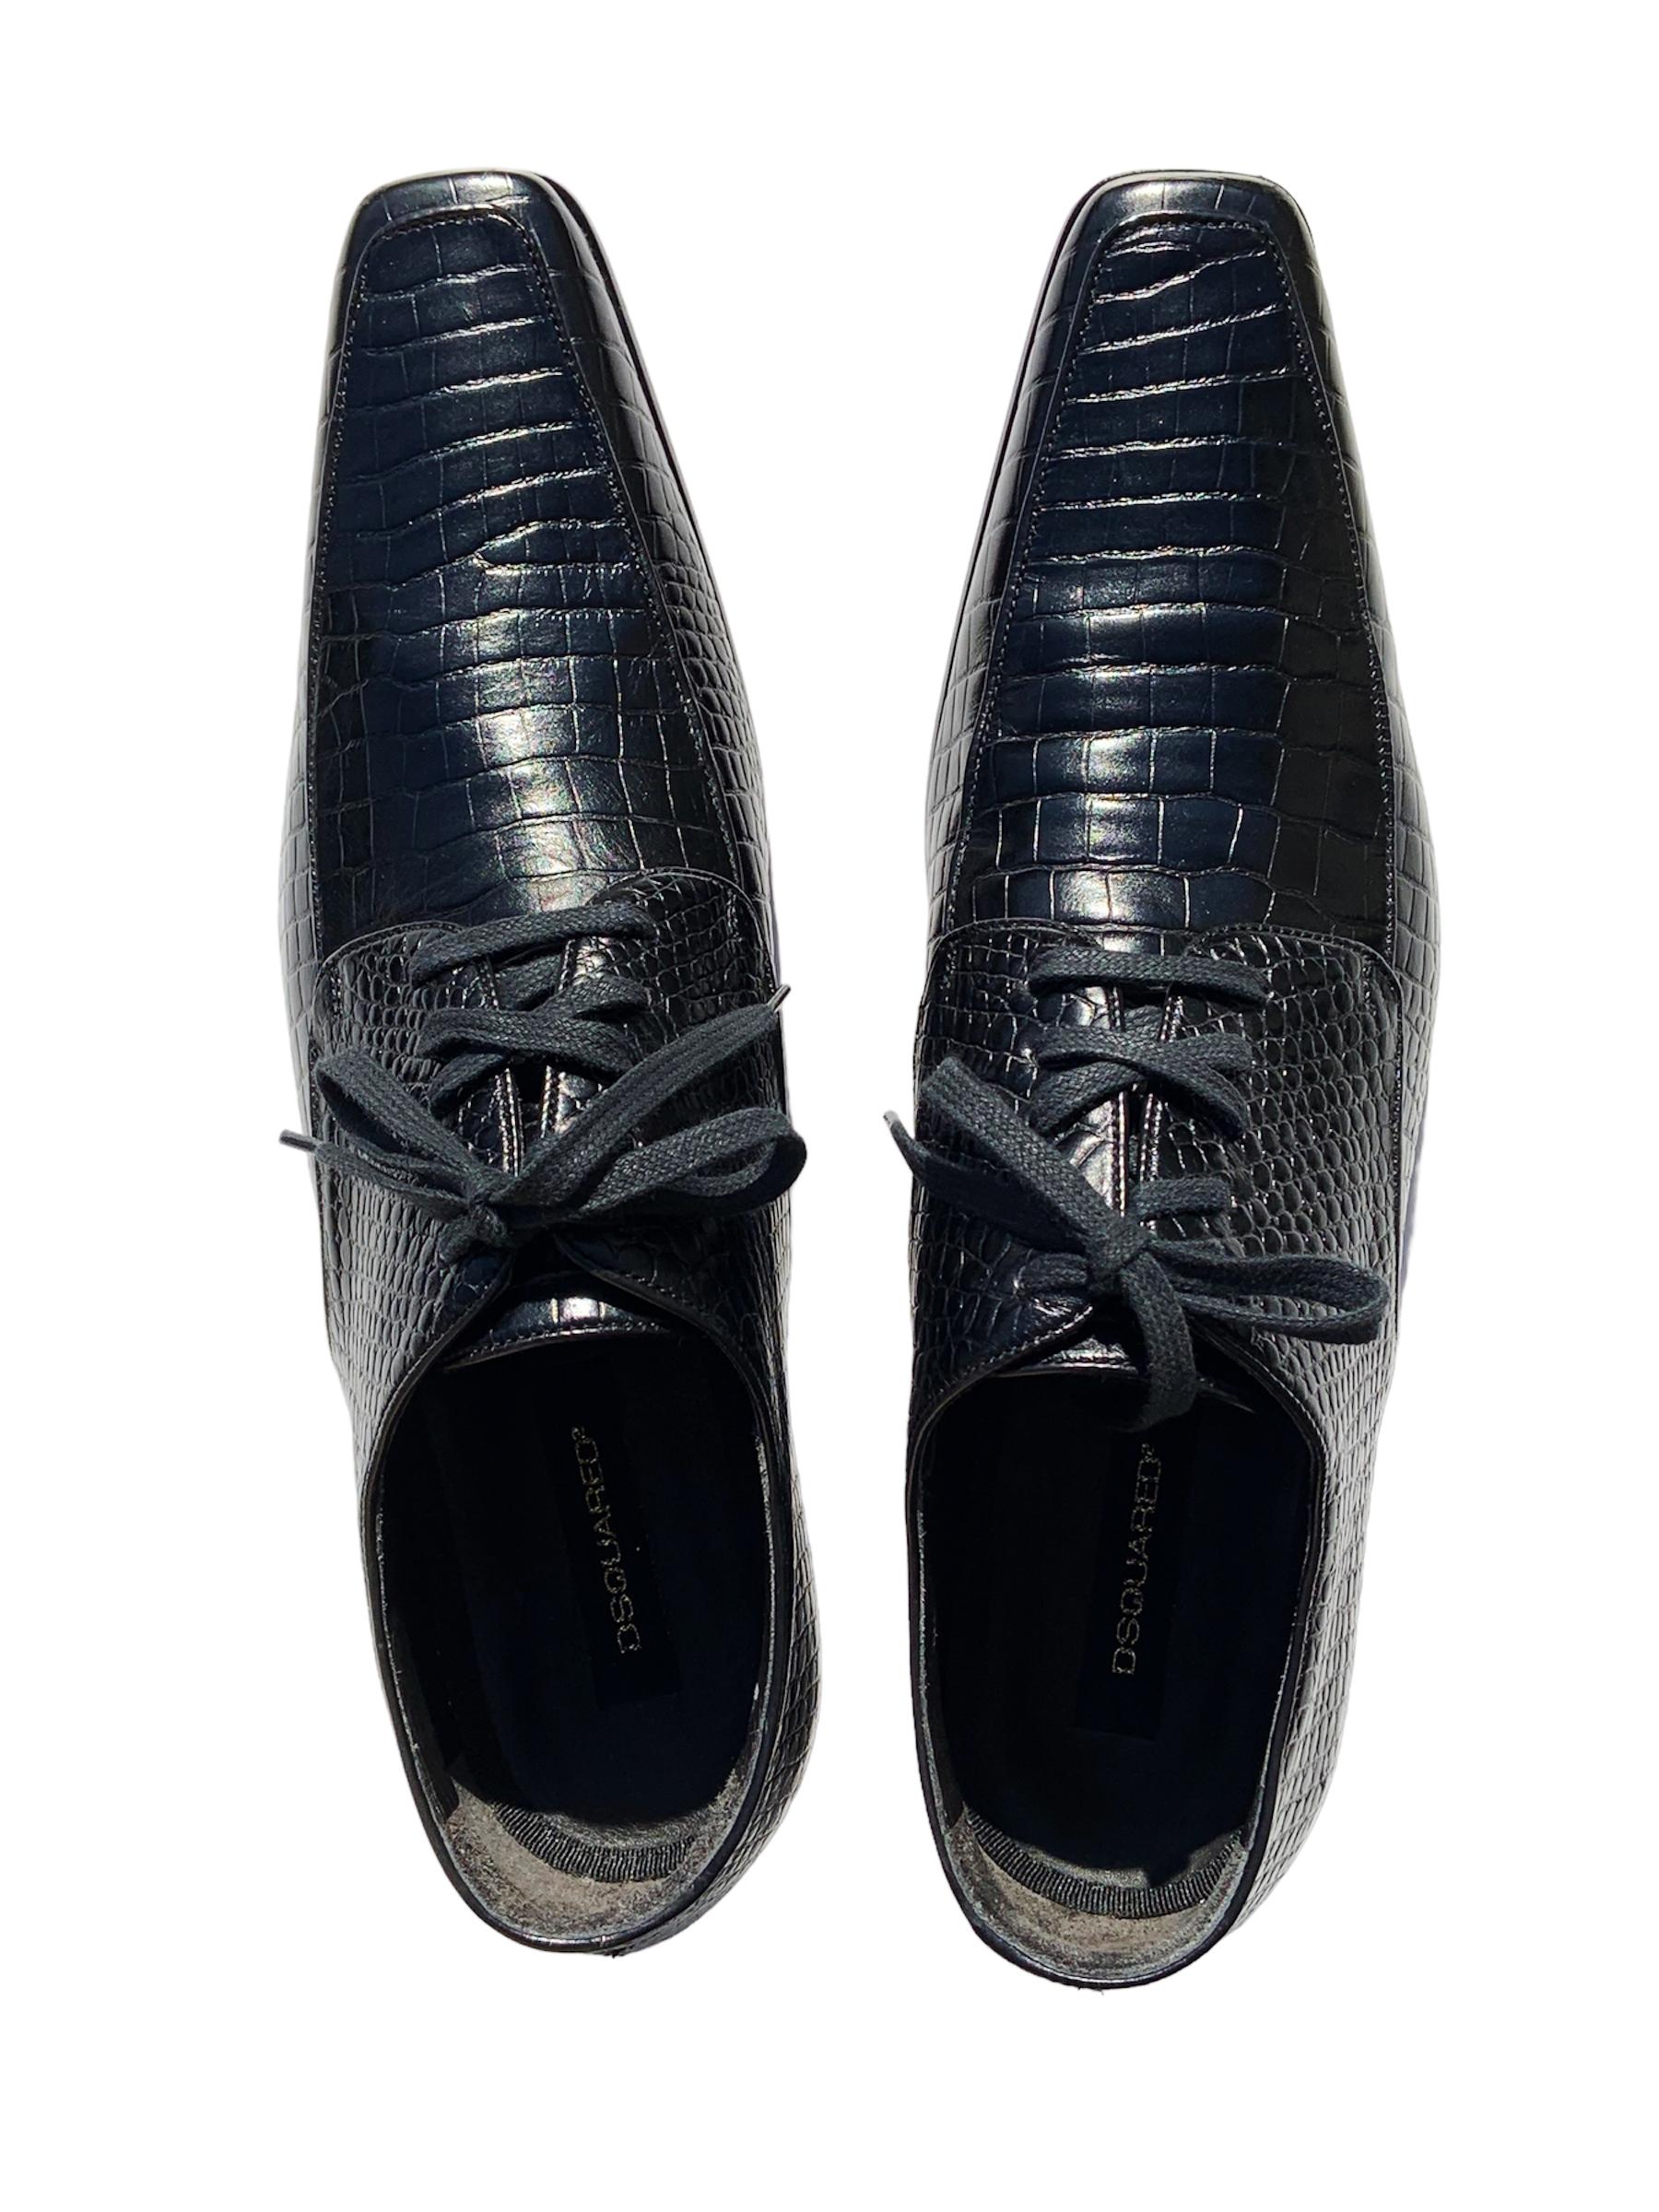 NWT Dsquared2 Black Crocodile Men's Lace Up Dress Shoes Italian 43 In New Condition For Sale In Montgomery, TX